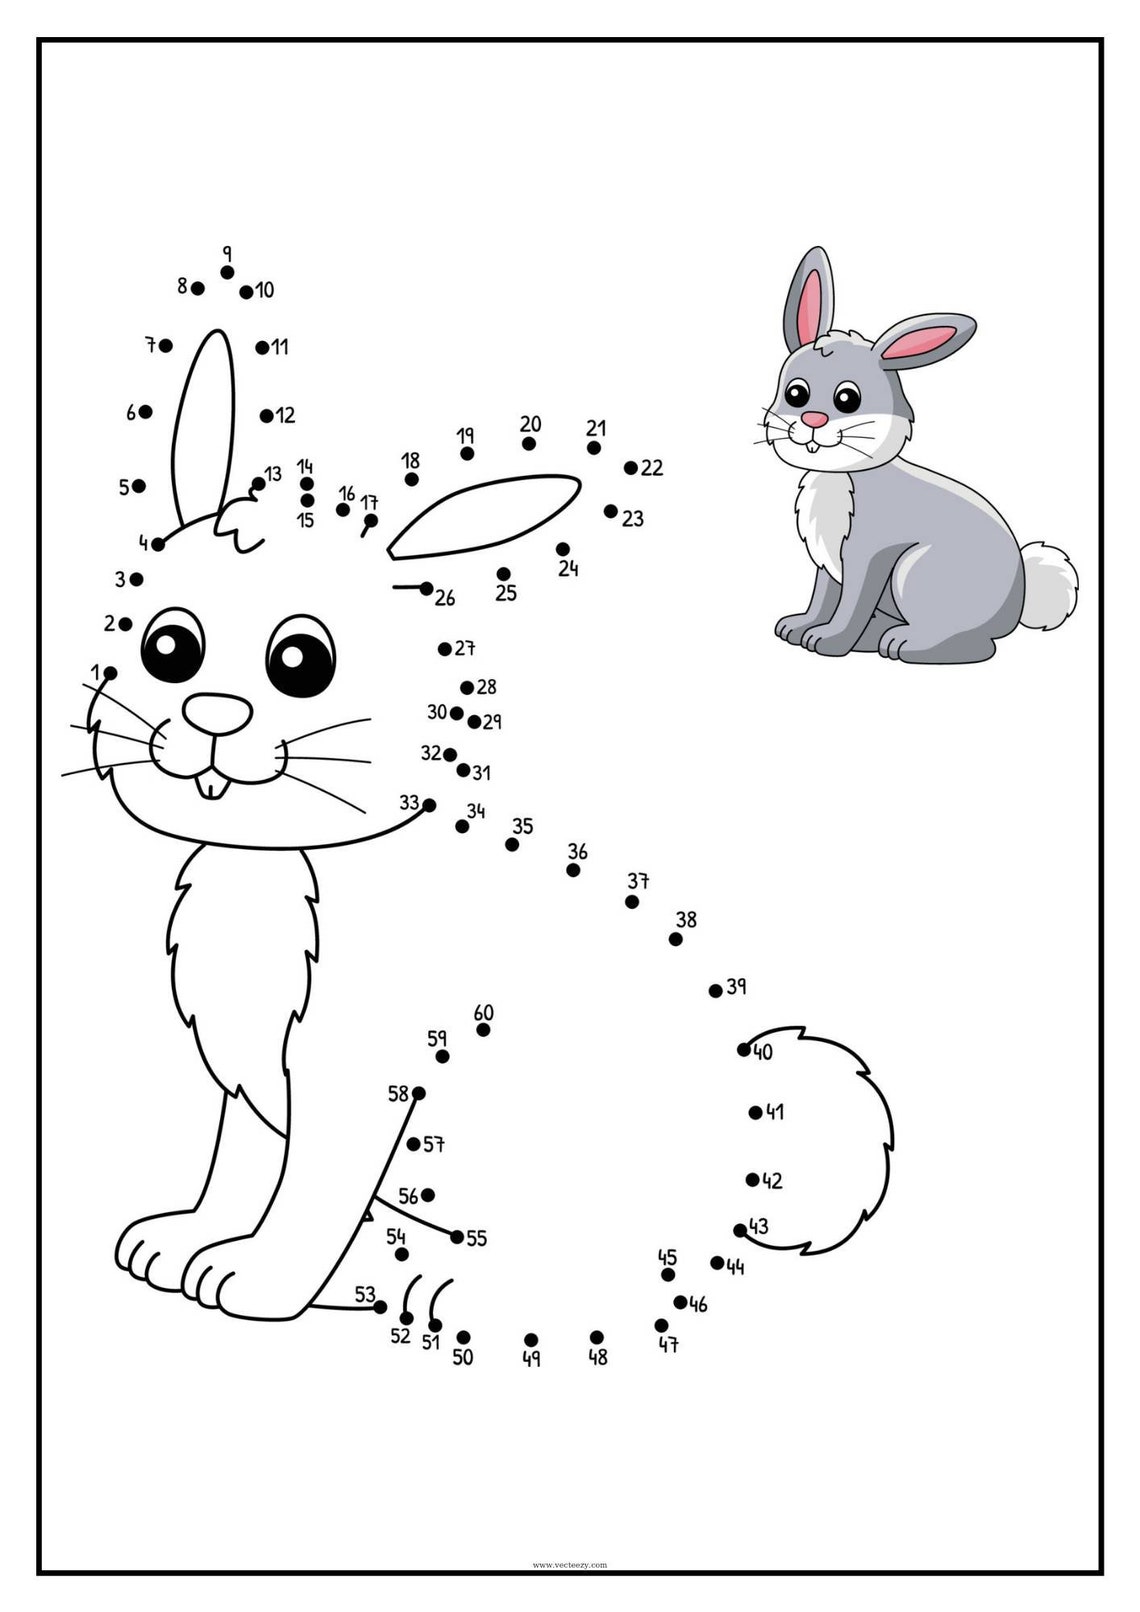 dot-to-dot-animals-coloring-printable-20-pages-etsy